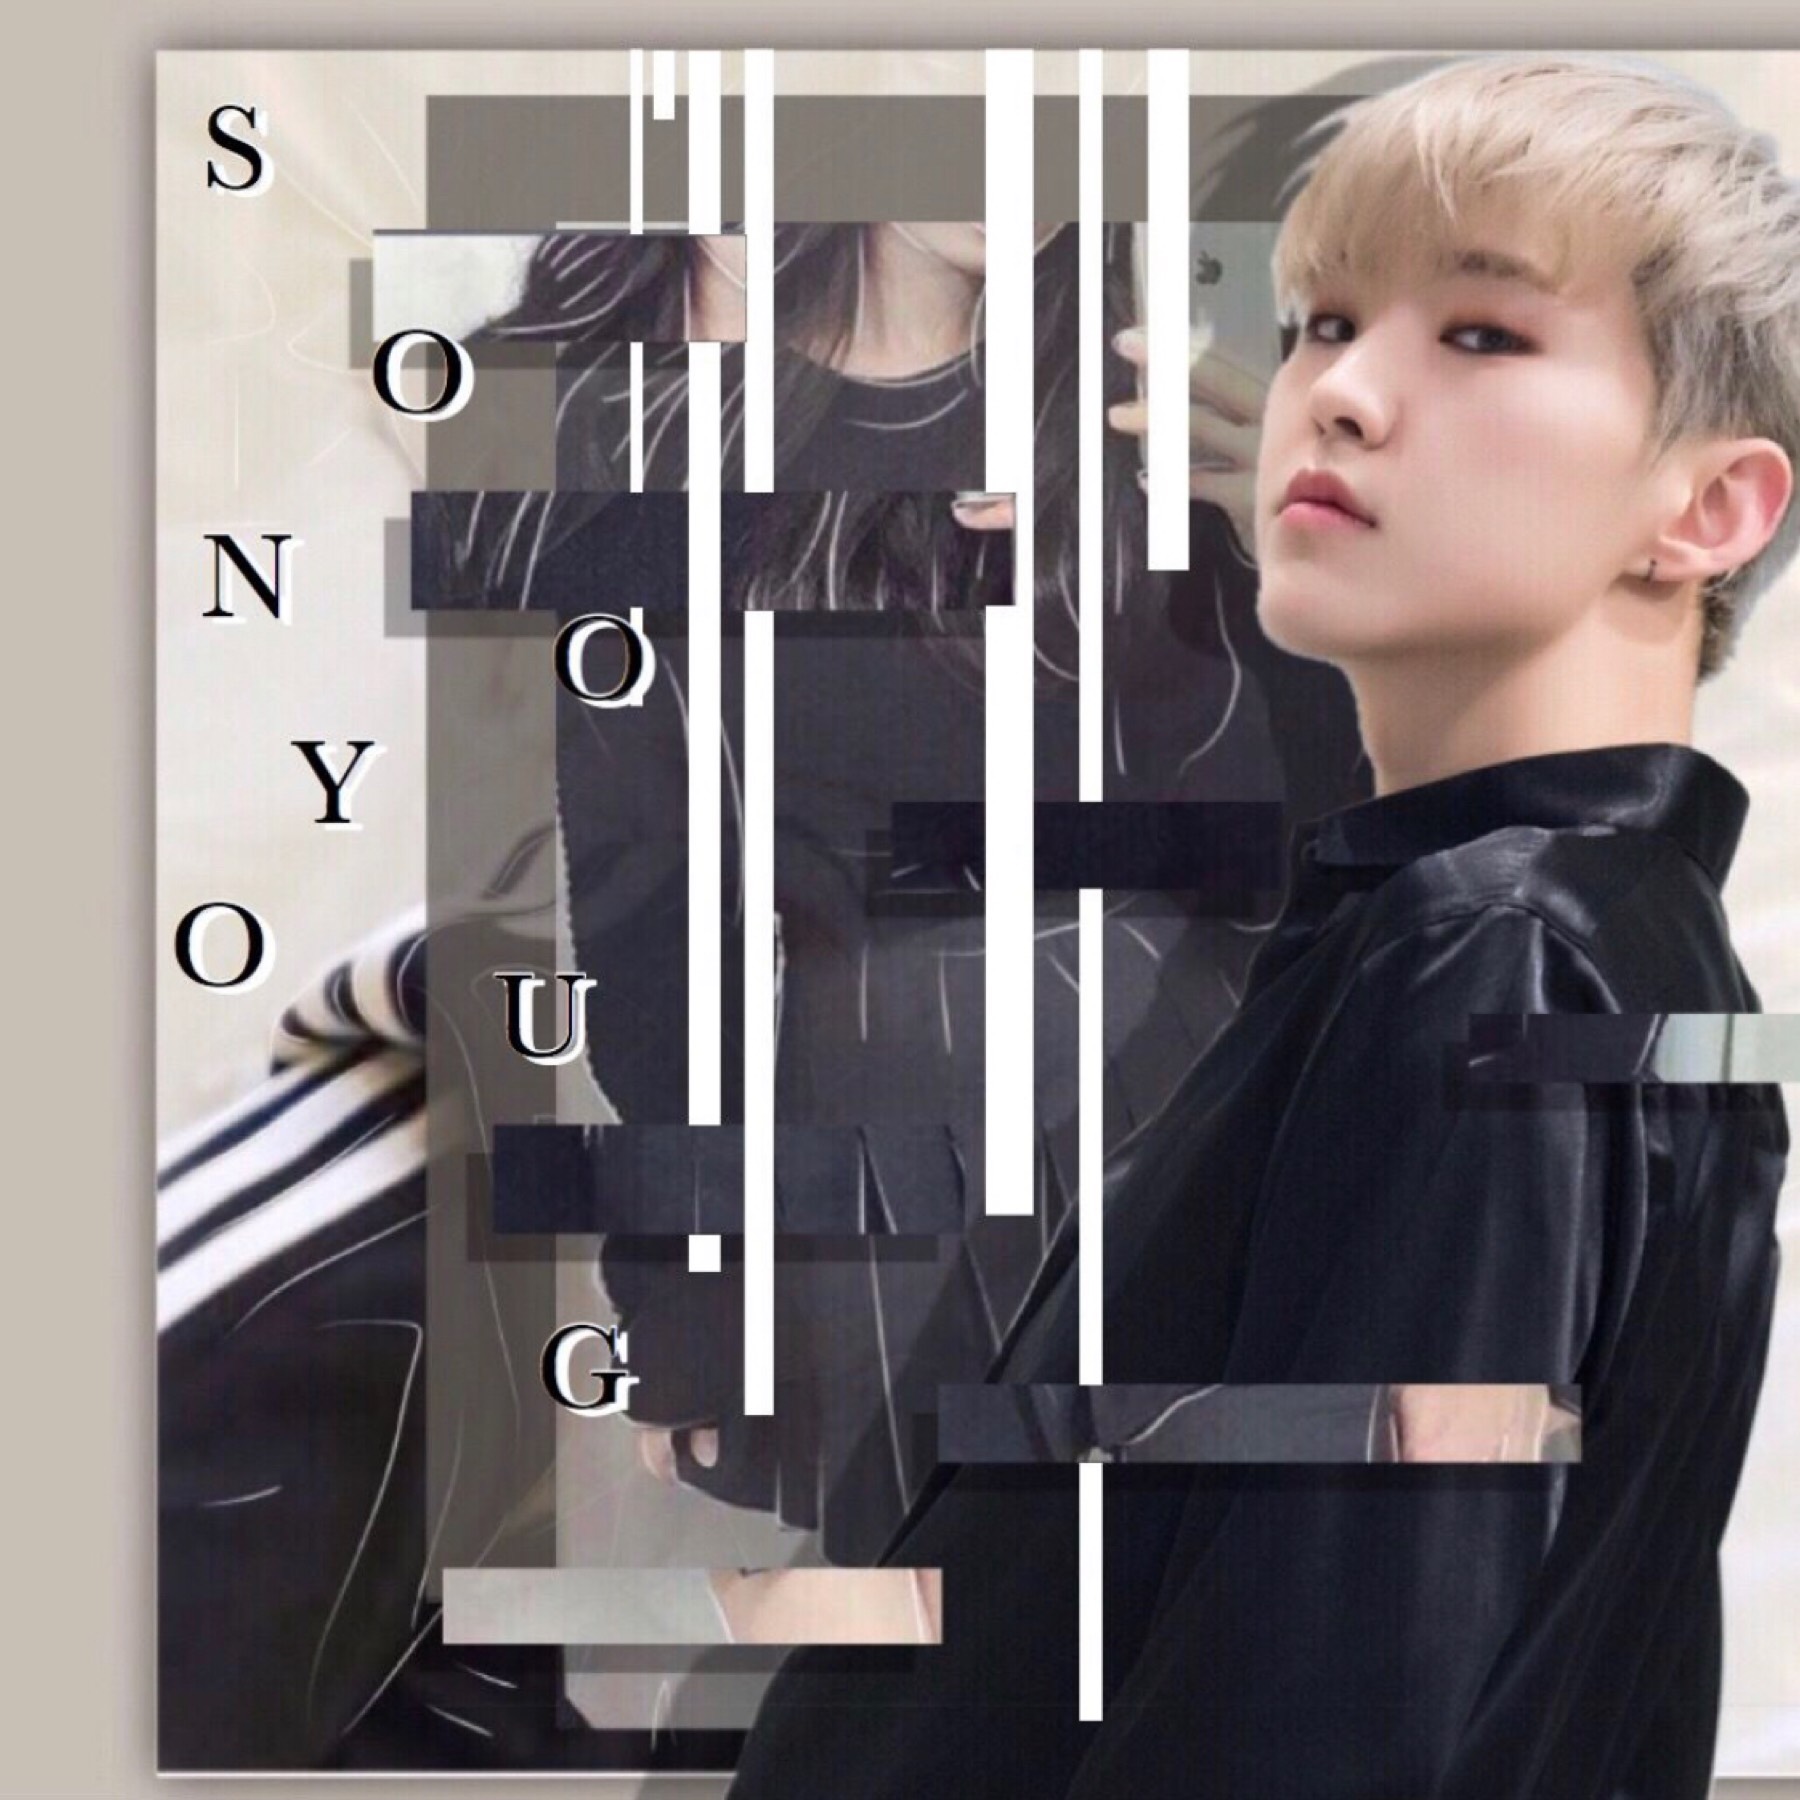 ⌁𝔭𝔢𝔞𝔠𝔥𝔢𝔰 𝔞𝔫𝔡 𝔠𝔯𝔢𝔞𝔪⌁
-ciao brochachos🤠
SEVENTEEN has been so underappreciated on pc smh
here’s a Hoshi edit to cleanse your soul
🥣🥣whisk whisk🥣🥣
II🍑II